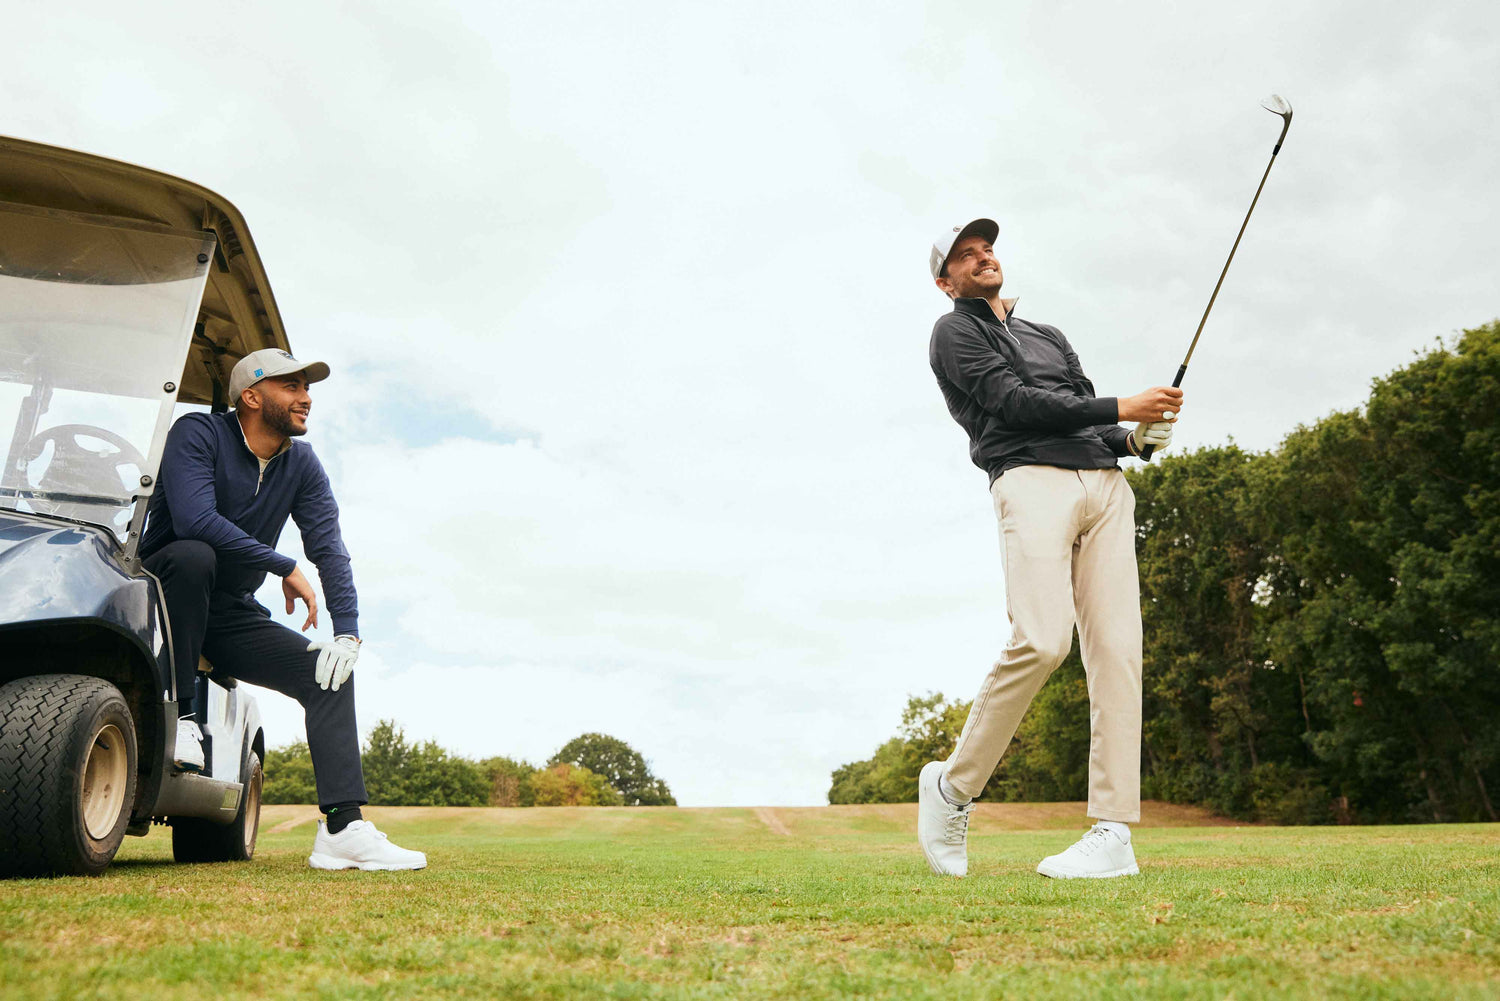 Golfers taking shot wearing golf clothes